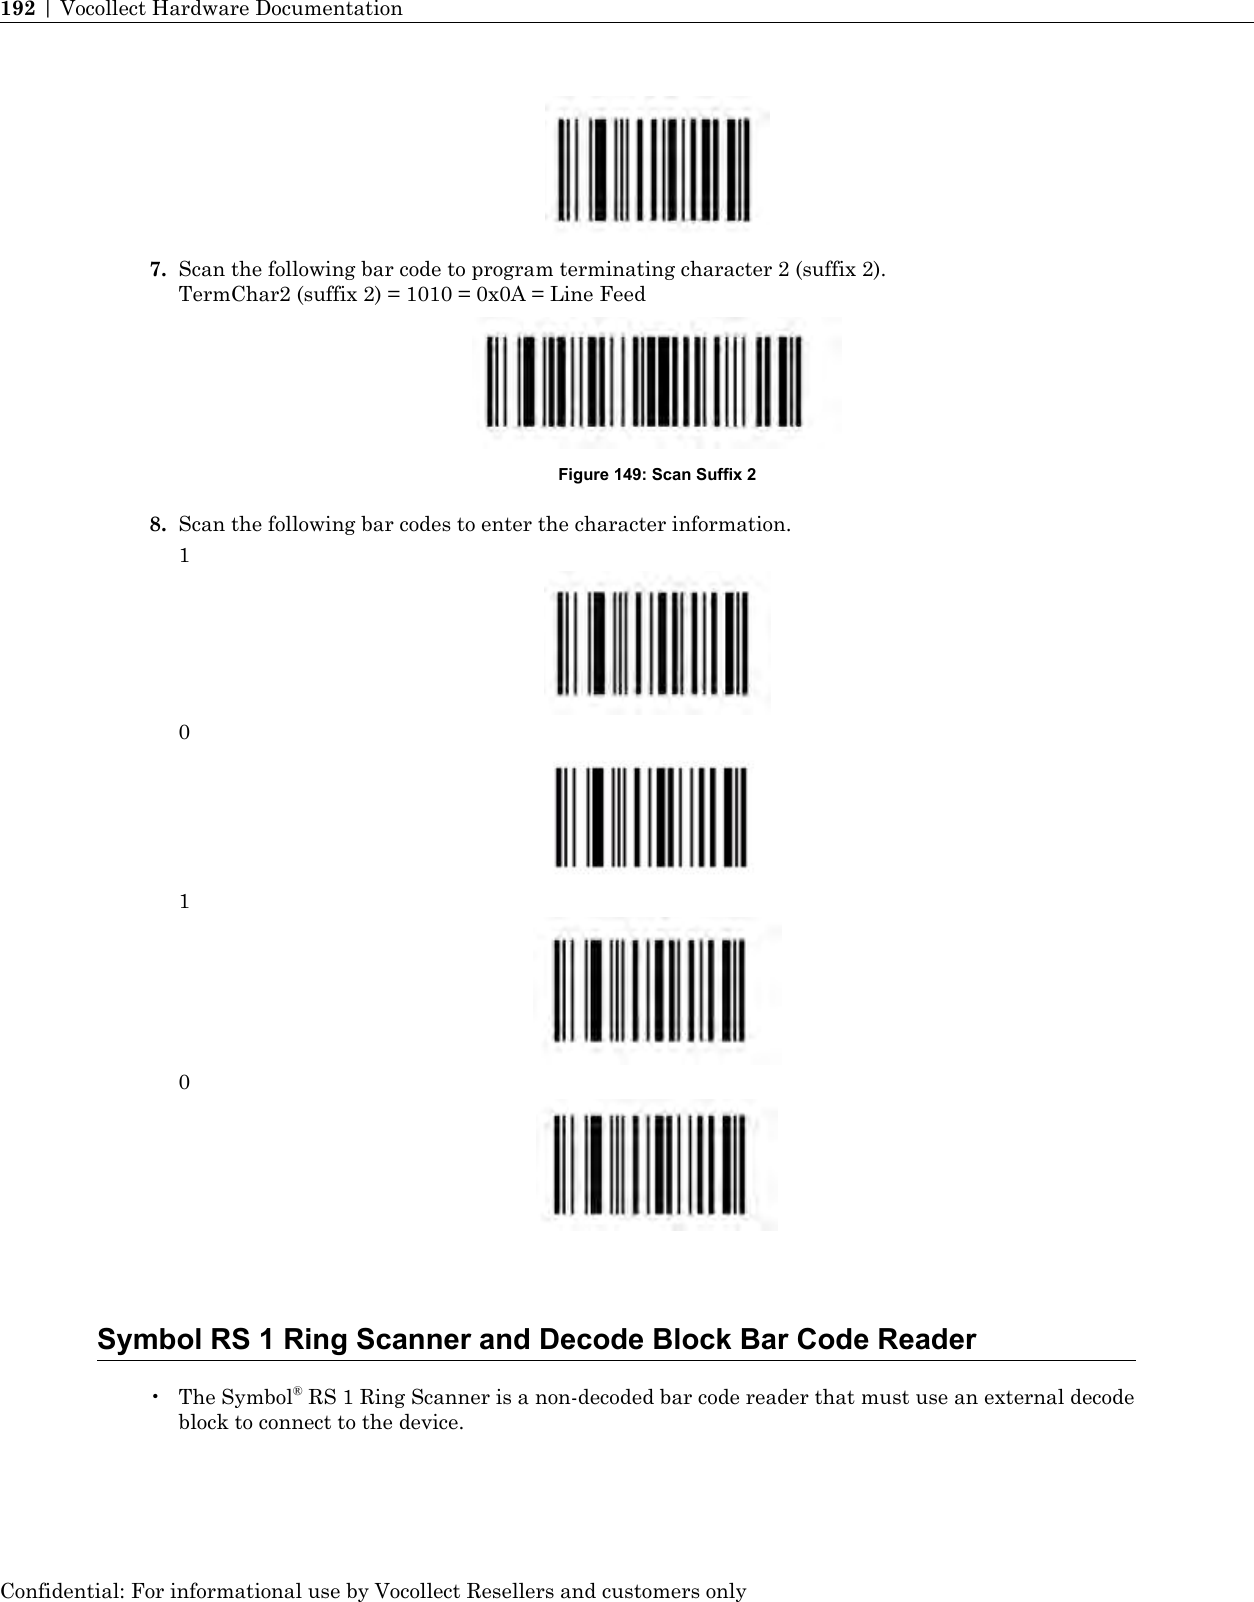 7. Scan the following bar code to program terminating character 2 (suffix 2).TermChar2 (suffix 2) = 1010 = 0x0A = Line FeedFigure 149: Scan Suffix 28. Scan the following bar codes to enter the character information.1010Symbol RS 1 Ring Scanner and Decode Block Bar Code Reader• The Symbol®RS 1 Ring Scanner is a non-decoded bar code reader that must use an external decodeblock to connect to the device.Confidential: For informational use by Vocollect Resellers and customers only192 | Vocollect Hardware Documentation